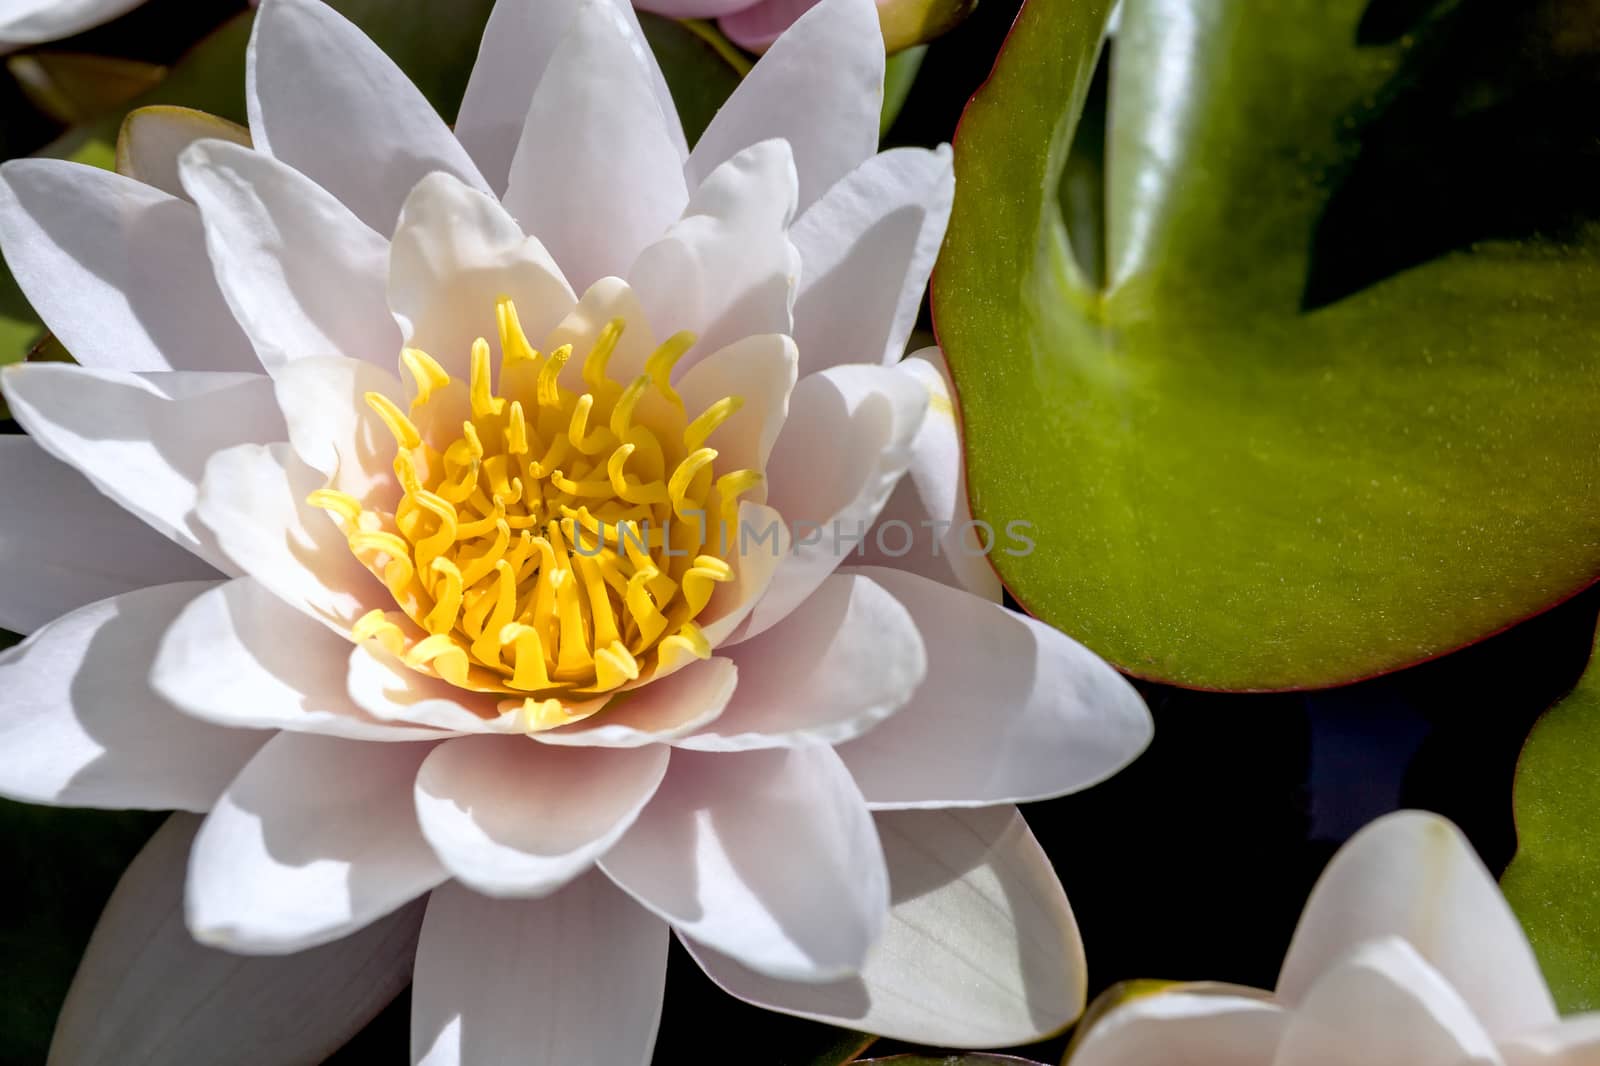 This photo was taken at a formal botanical garden near San Francisco, California. Spring had arrived, and flowers are in bloom. This image features a lily pond and beautiful blooming Lotus flower.